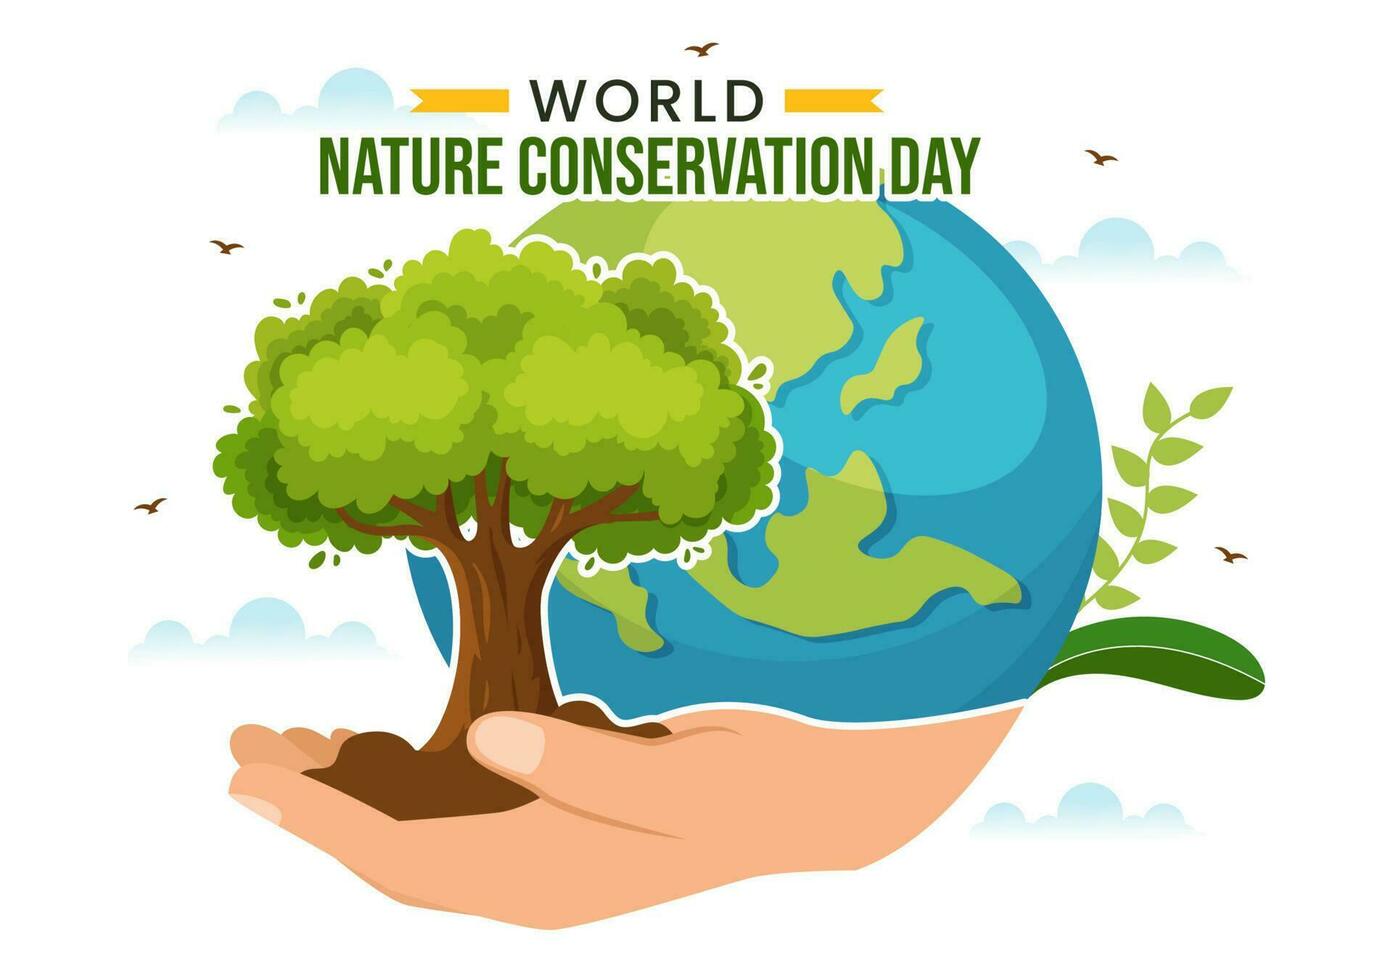 World Nature Conservation Day Vector Illustration with World Map, Tree ...